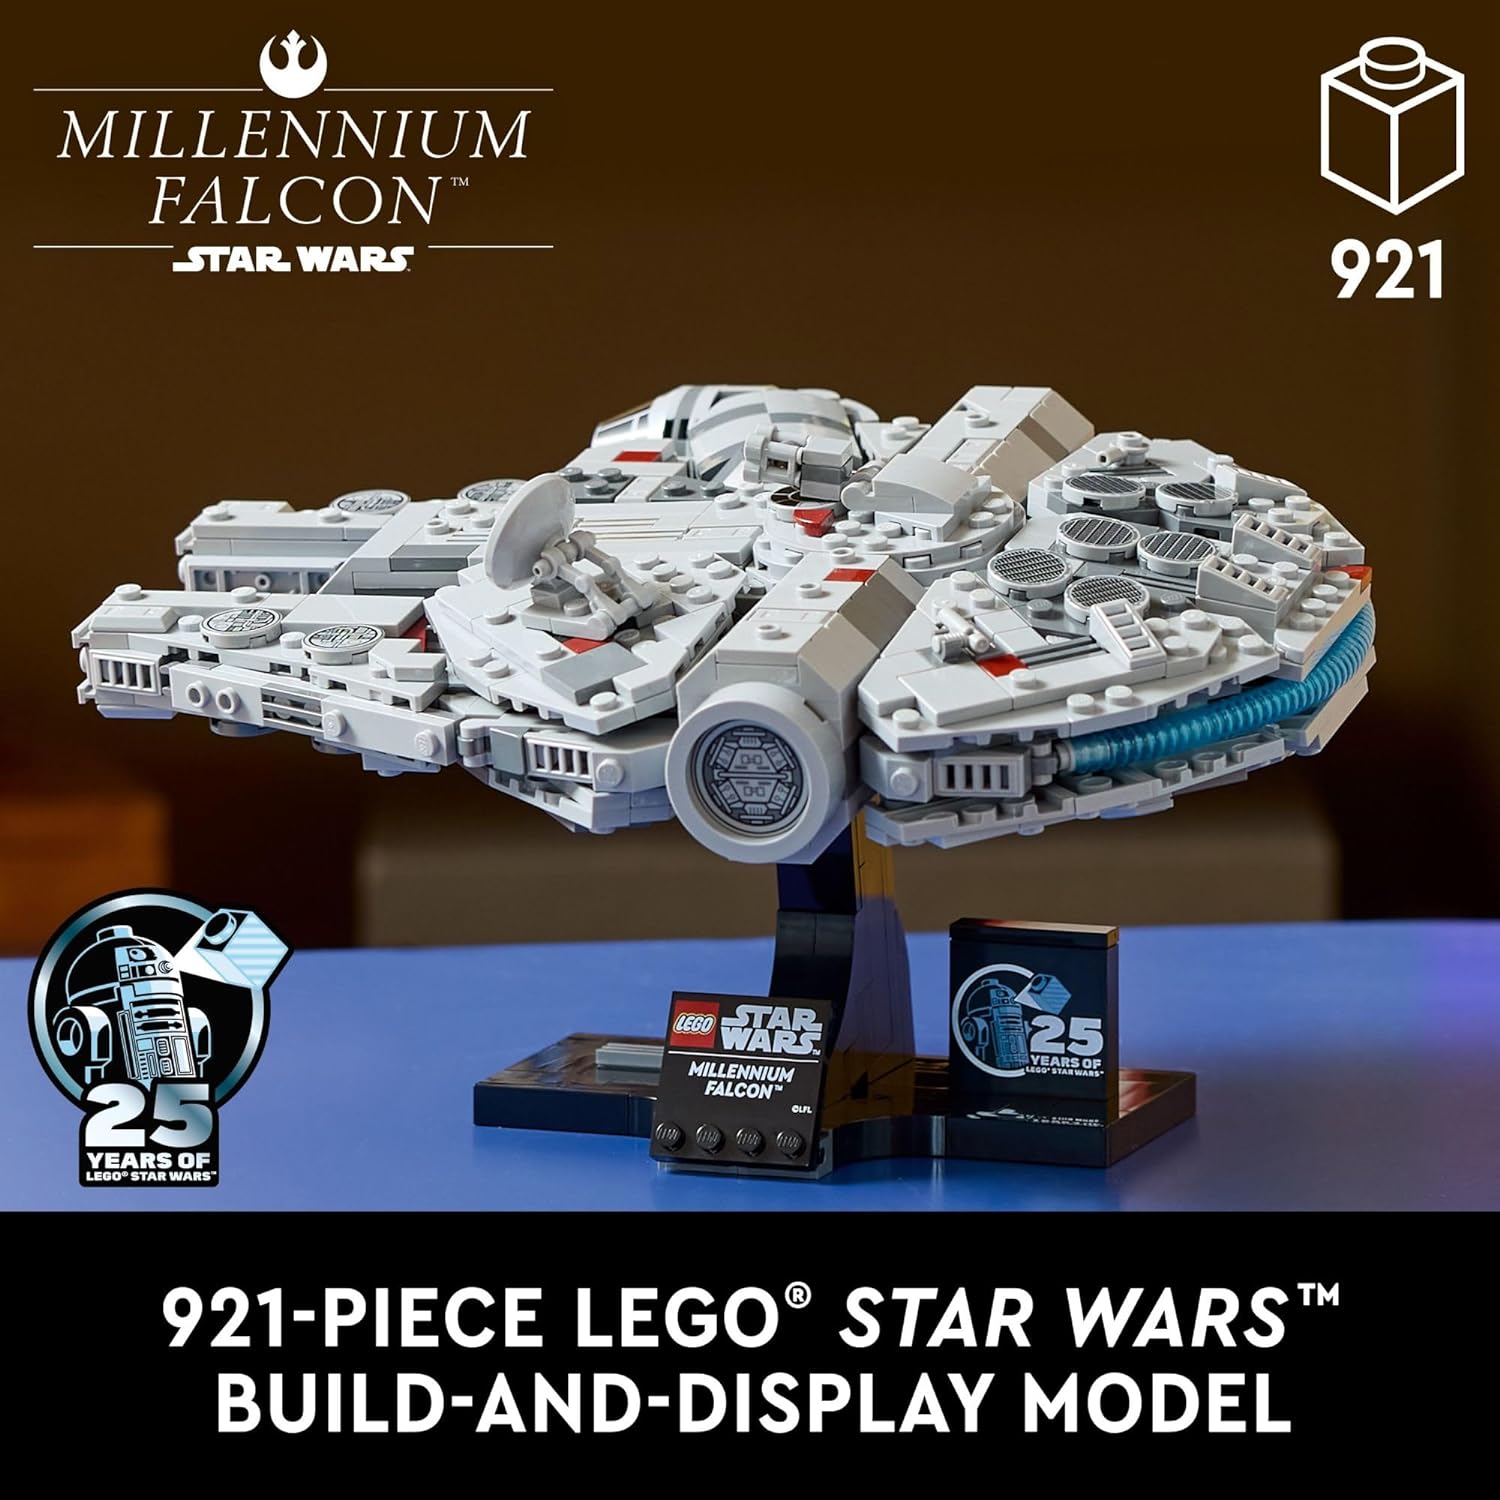 LEGO 75375 Star Wars A New Hope Millennium Falcon 25th Anniversary Buildable Starship Model, Collectible Star Wars Home Décor, Building Set for Adults.